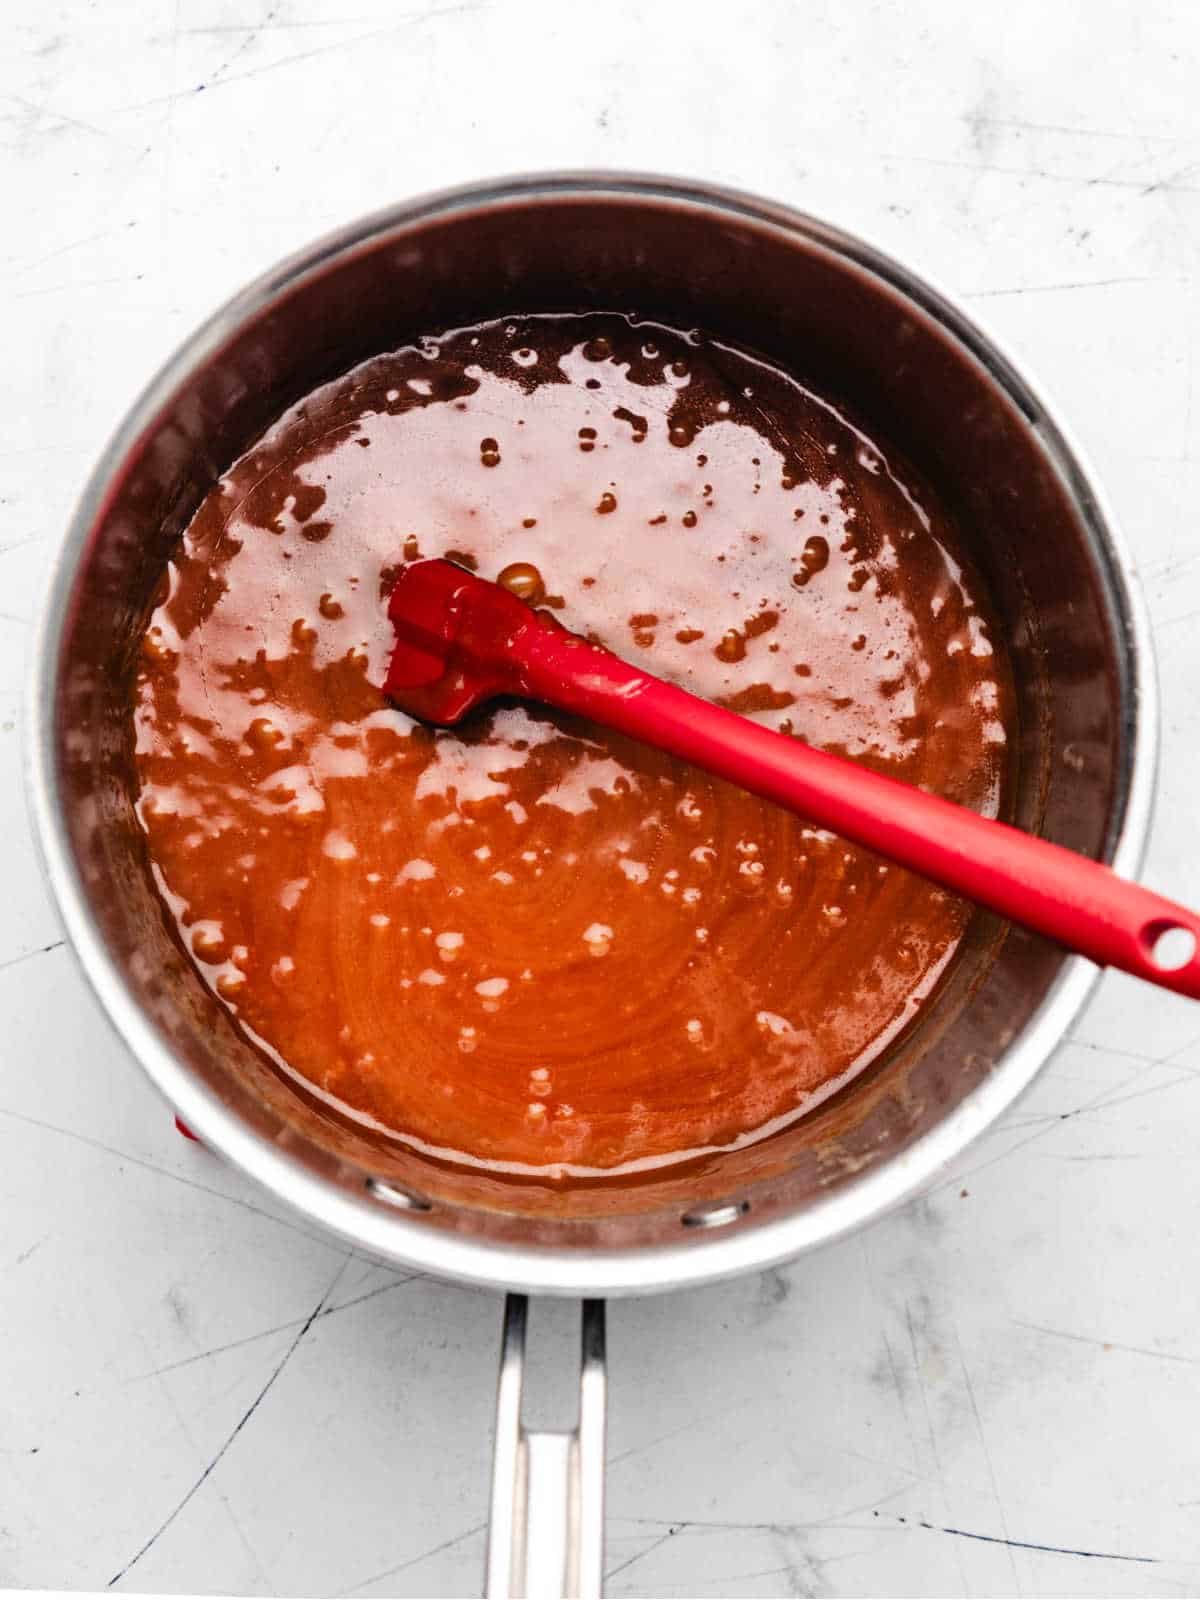 Cooked toffee mixture in a saucepan.